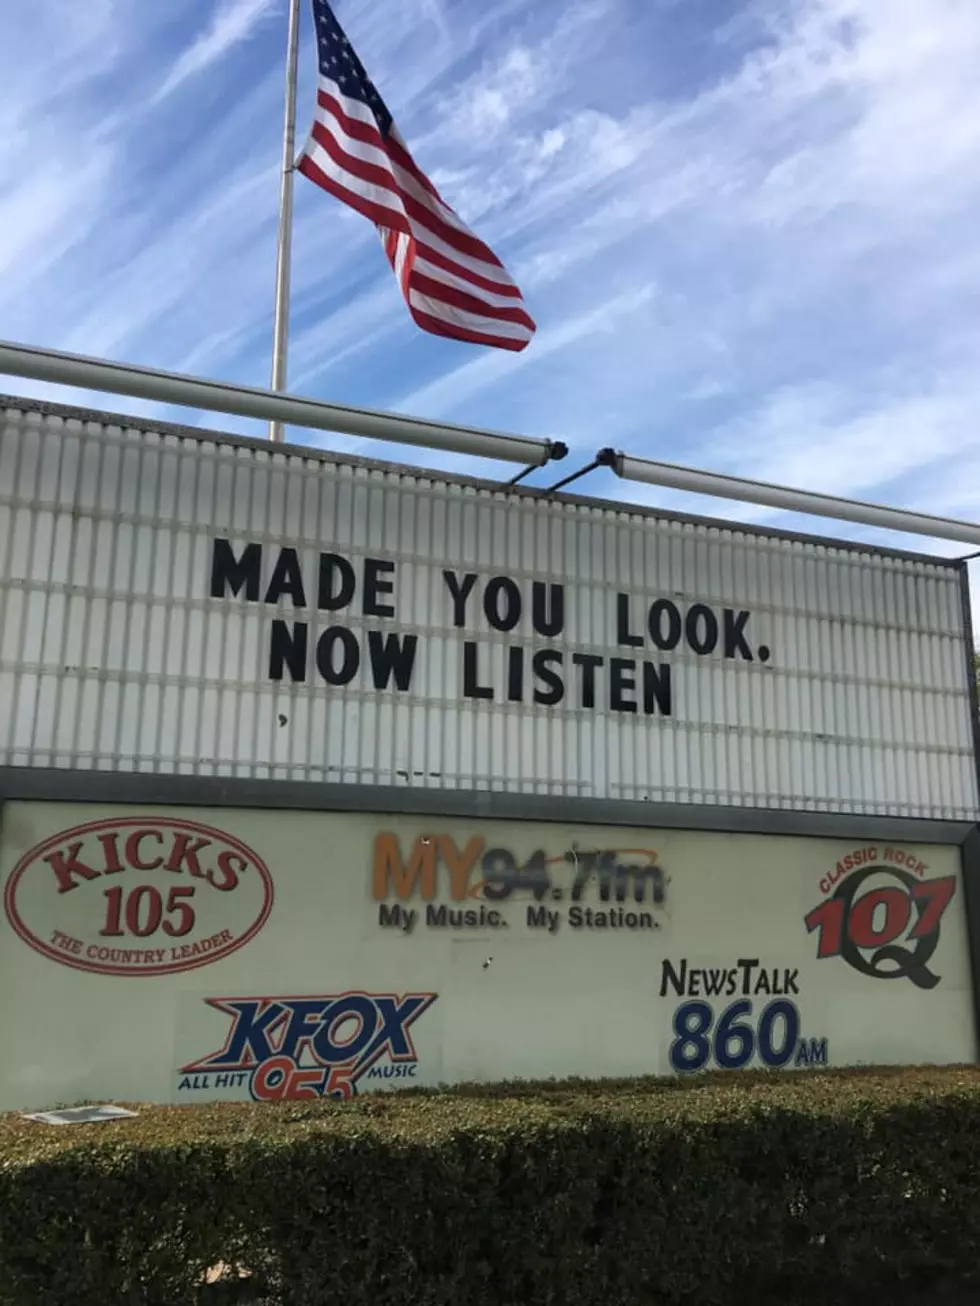 This is What Happens When Radio Guys Run Out Of Sign Ideas